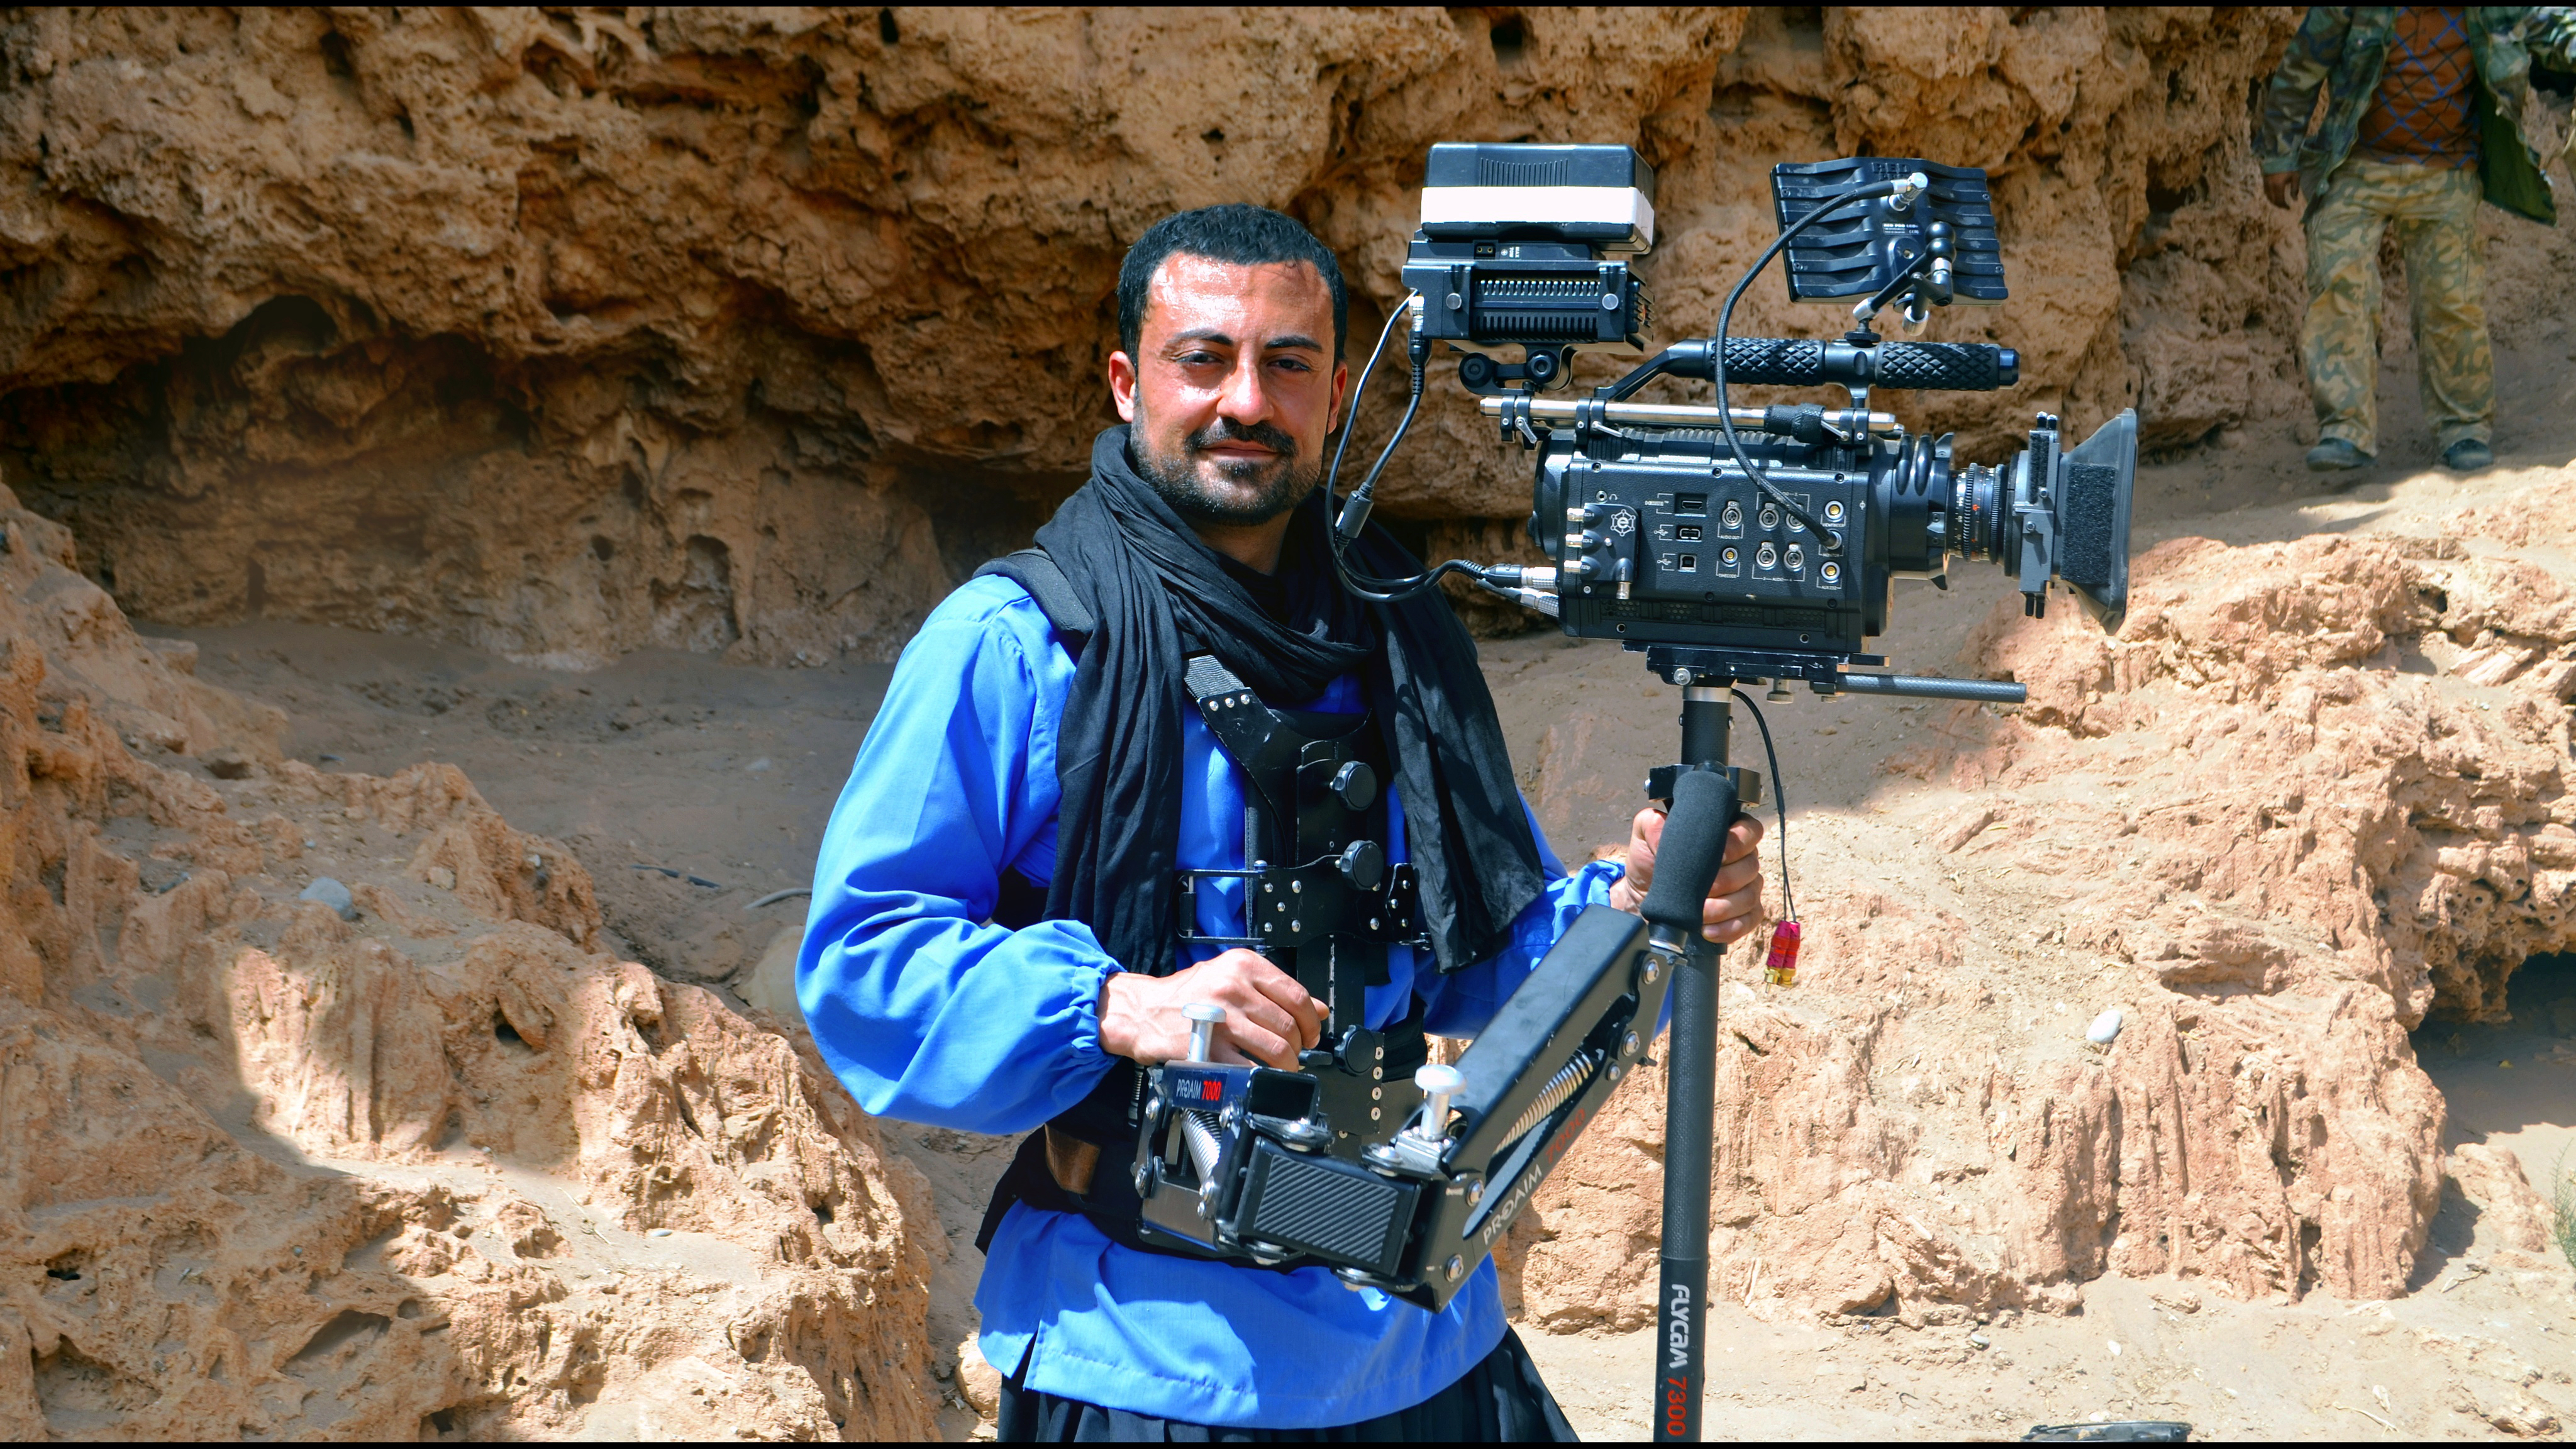 Shooting BARA (2015) Morocco Action film by Mohamed Qissi